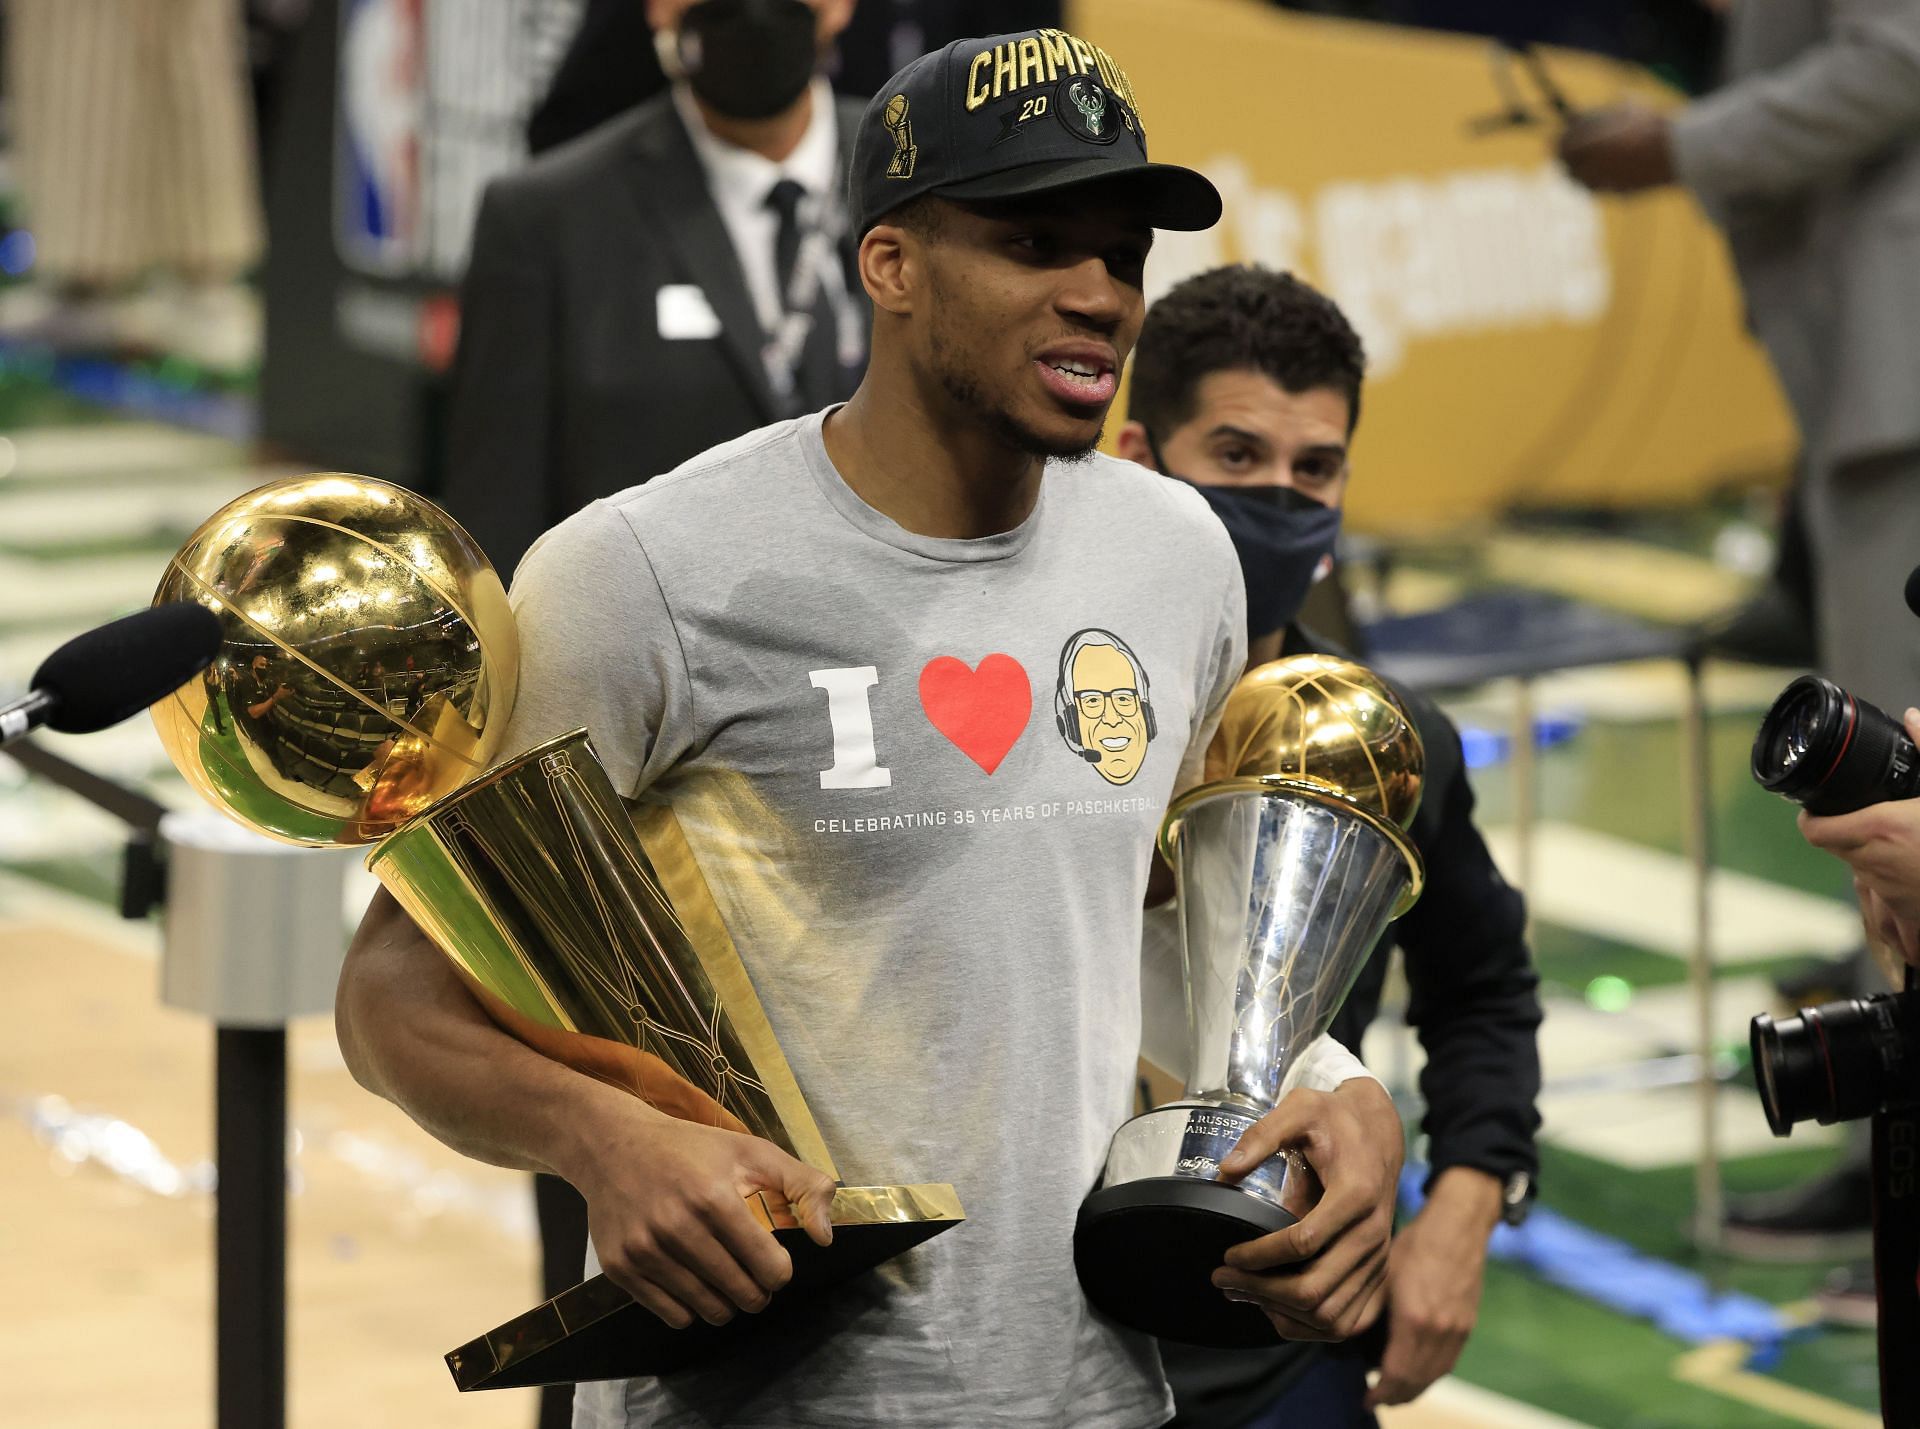 Giannis Antetokounmpo won his first championship in 2021 (Image via Getty Images)